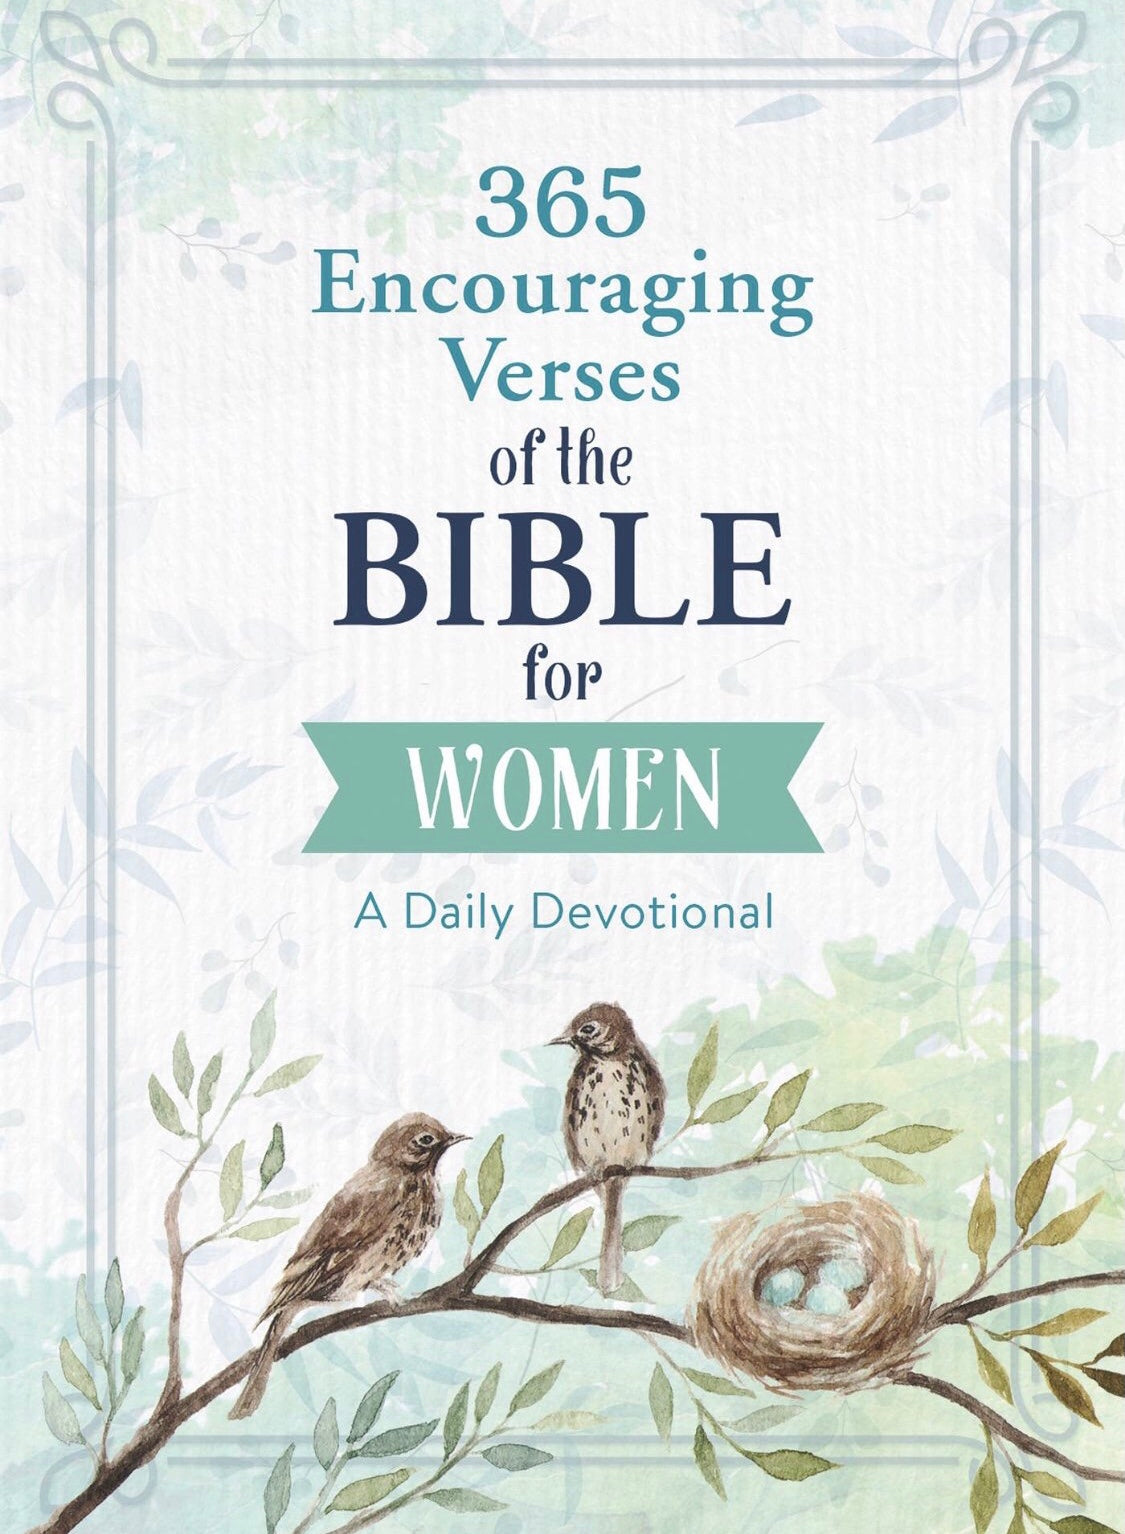 365 Encouraging Verses of the Bible for Women - A Daily Devotional